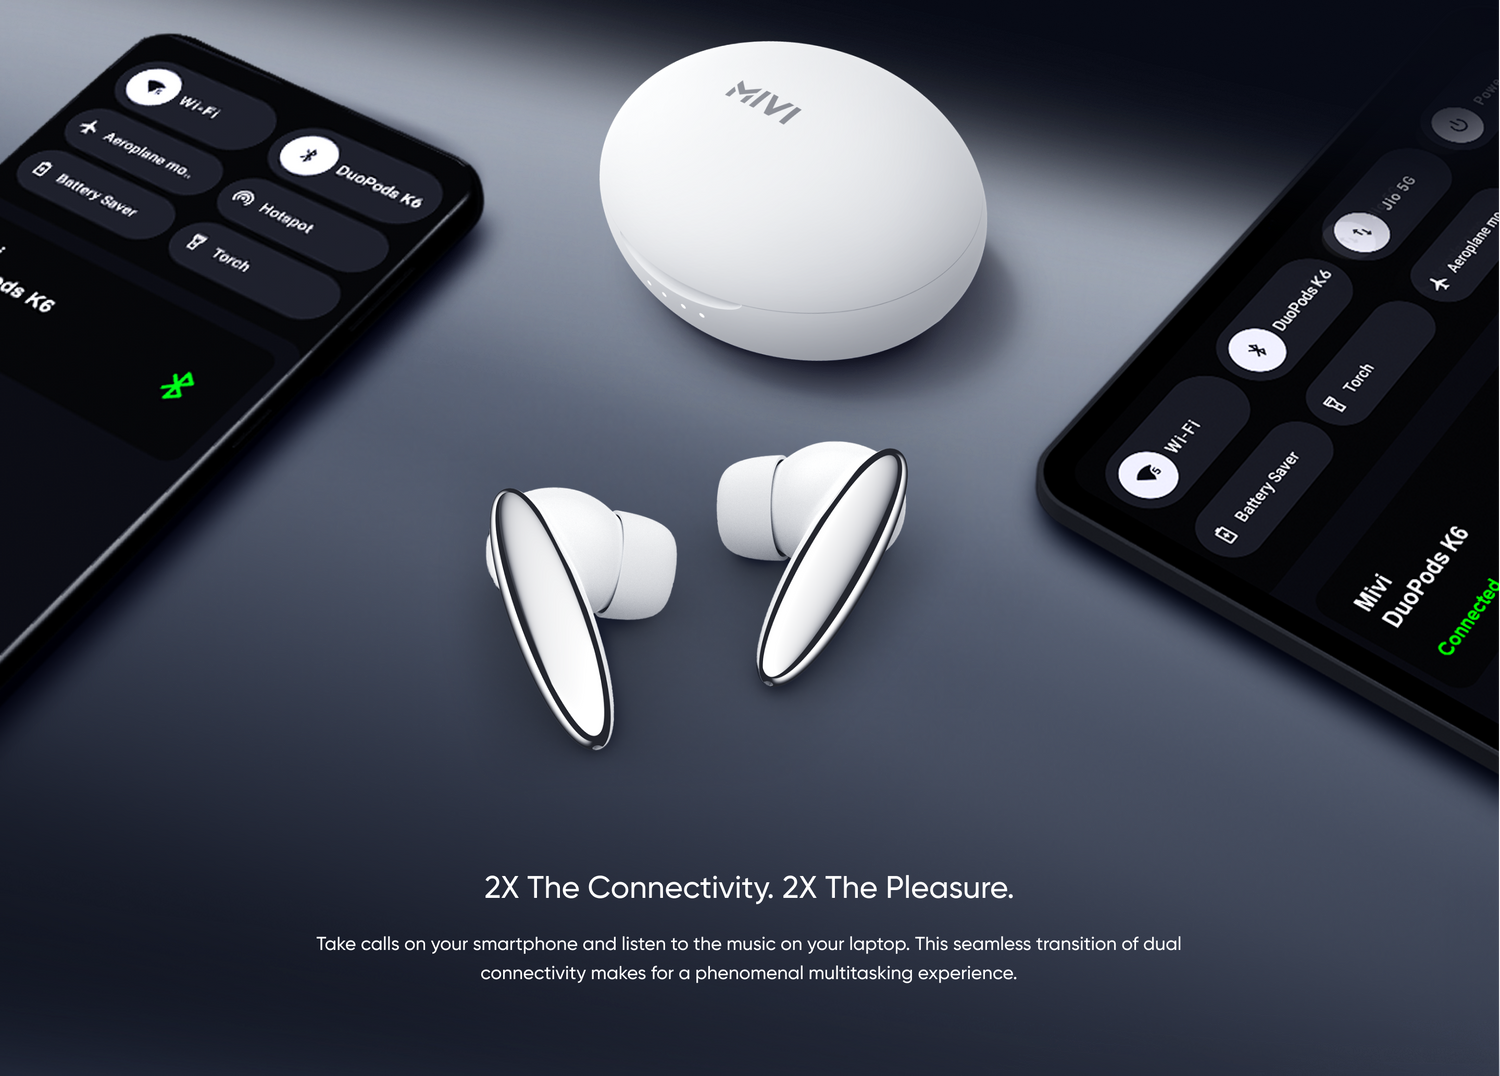 2X the Connectivity. 2X the Pleasure. - Take calls on your smartphone and listen to the music on your laptop. This seamless transition of dual connectivity makes for a phenomenal multitasking experience.